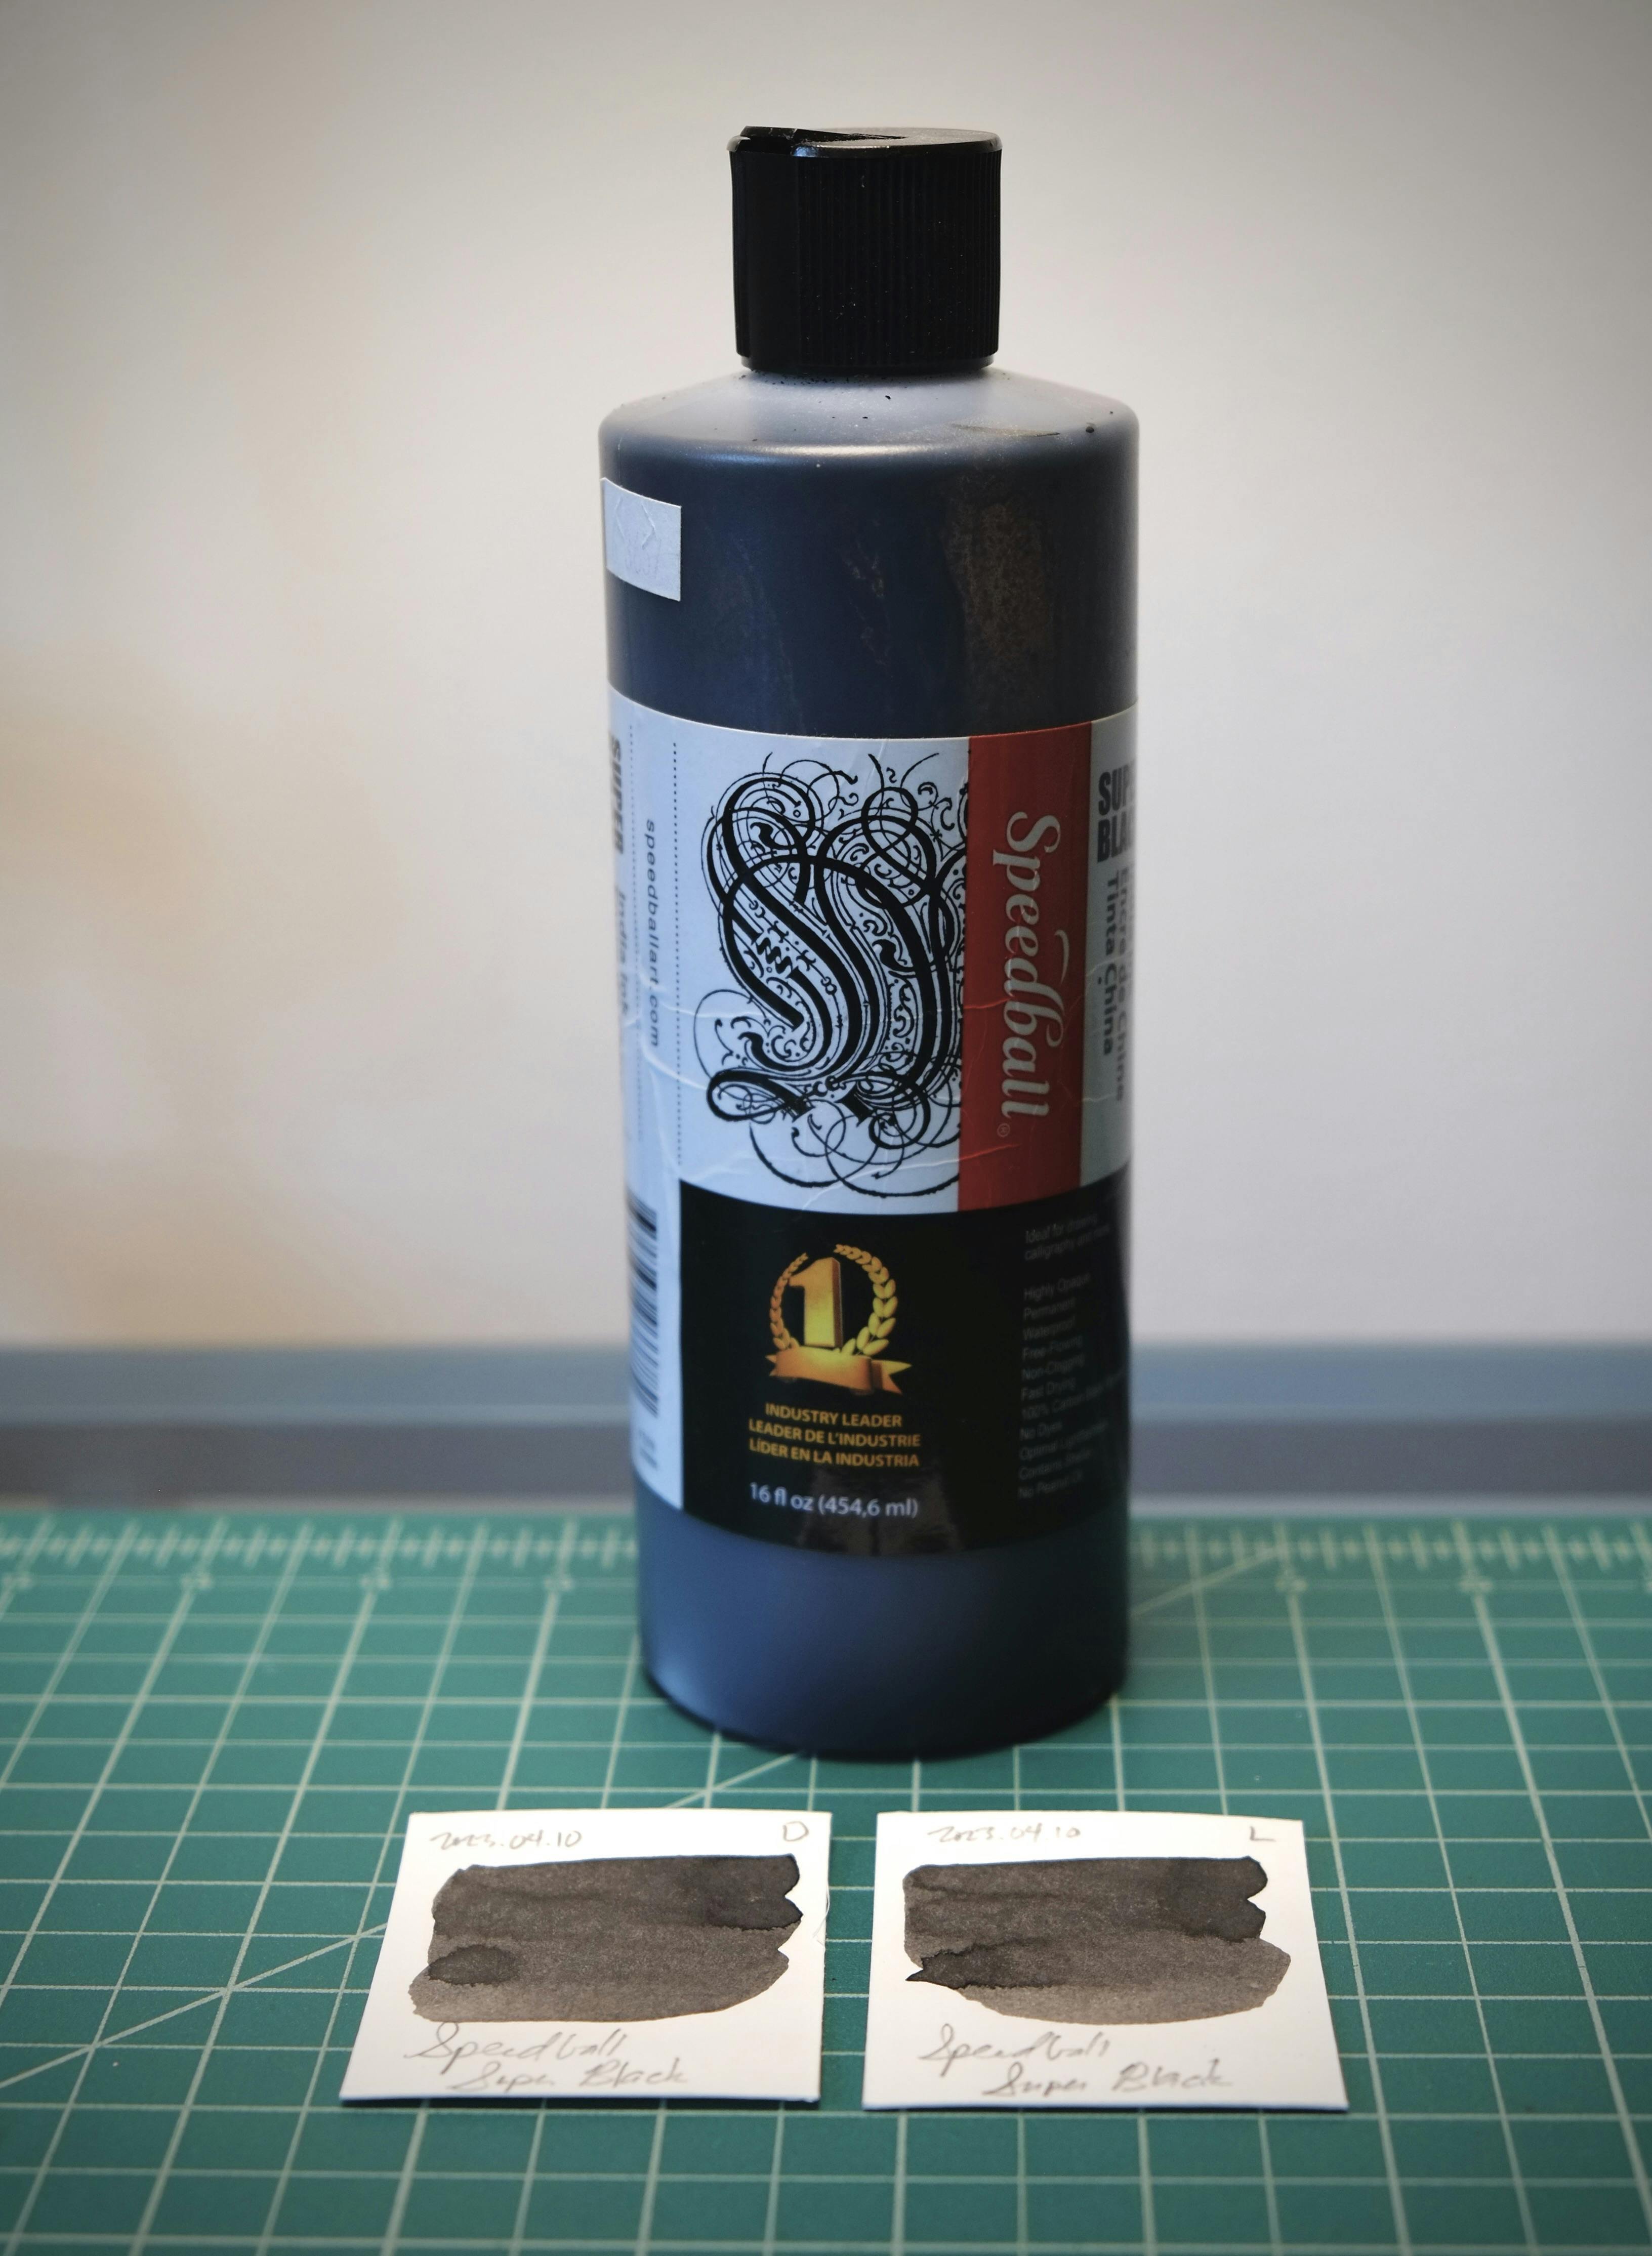 A bottle of Speedball Super Black India ink on a desk behind two color swatches